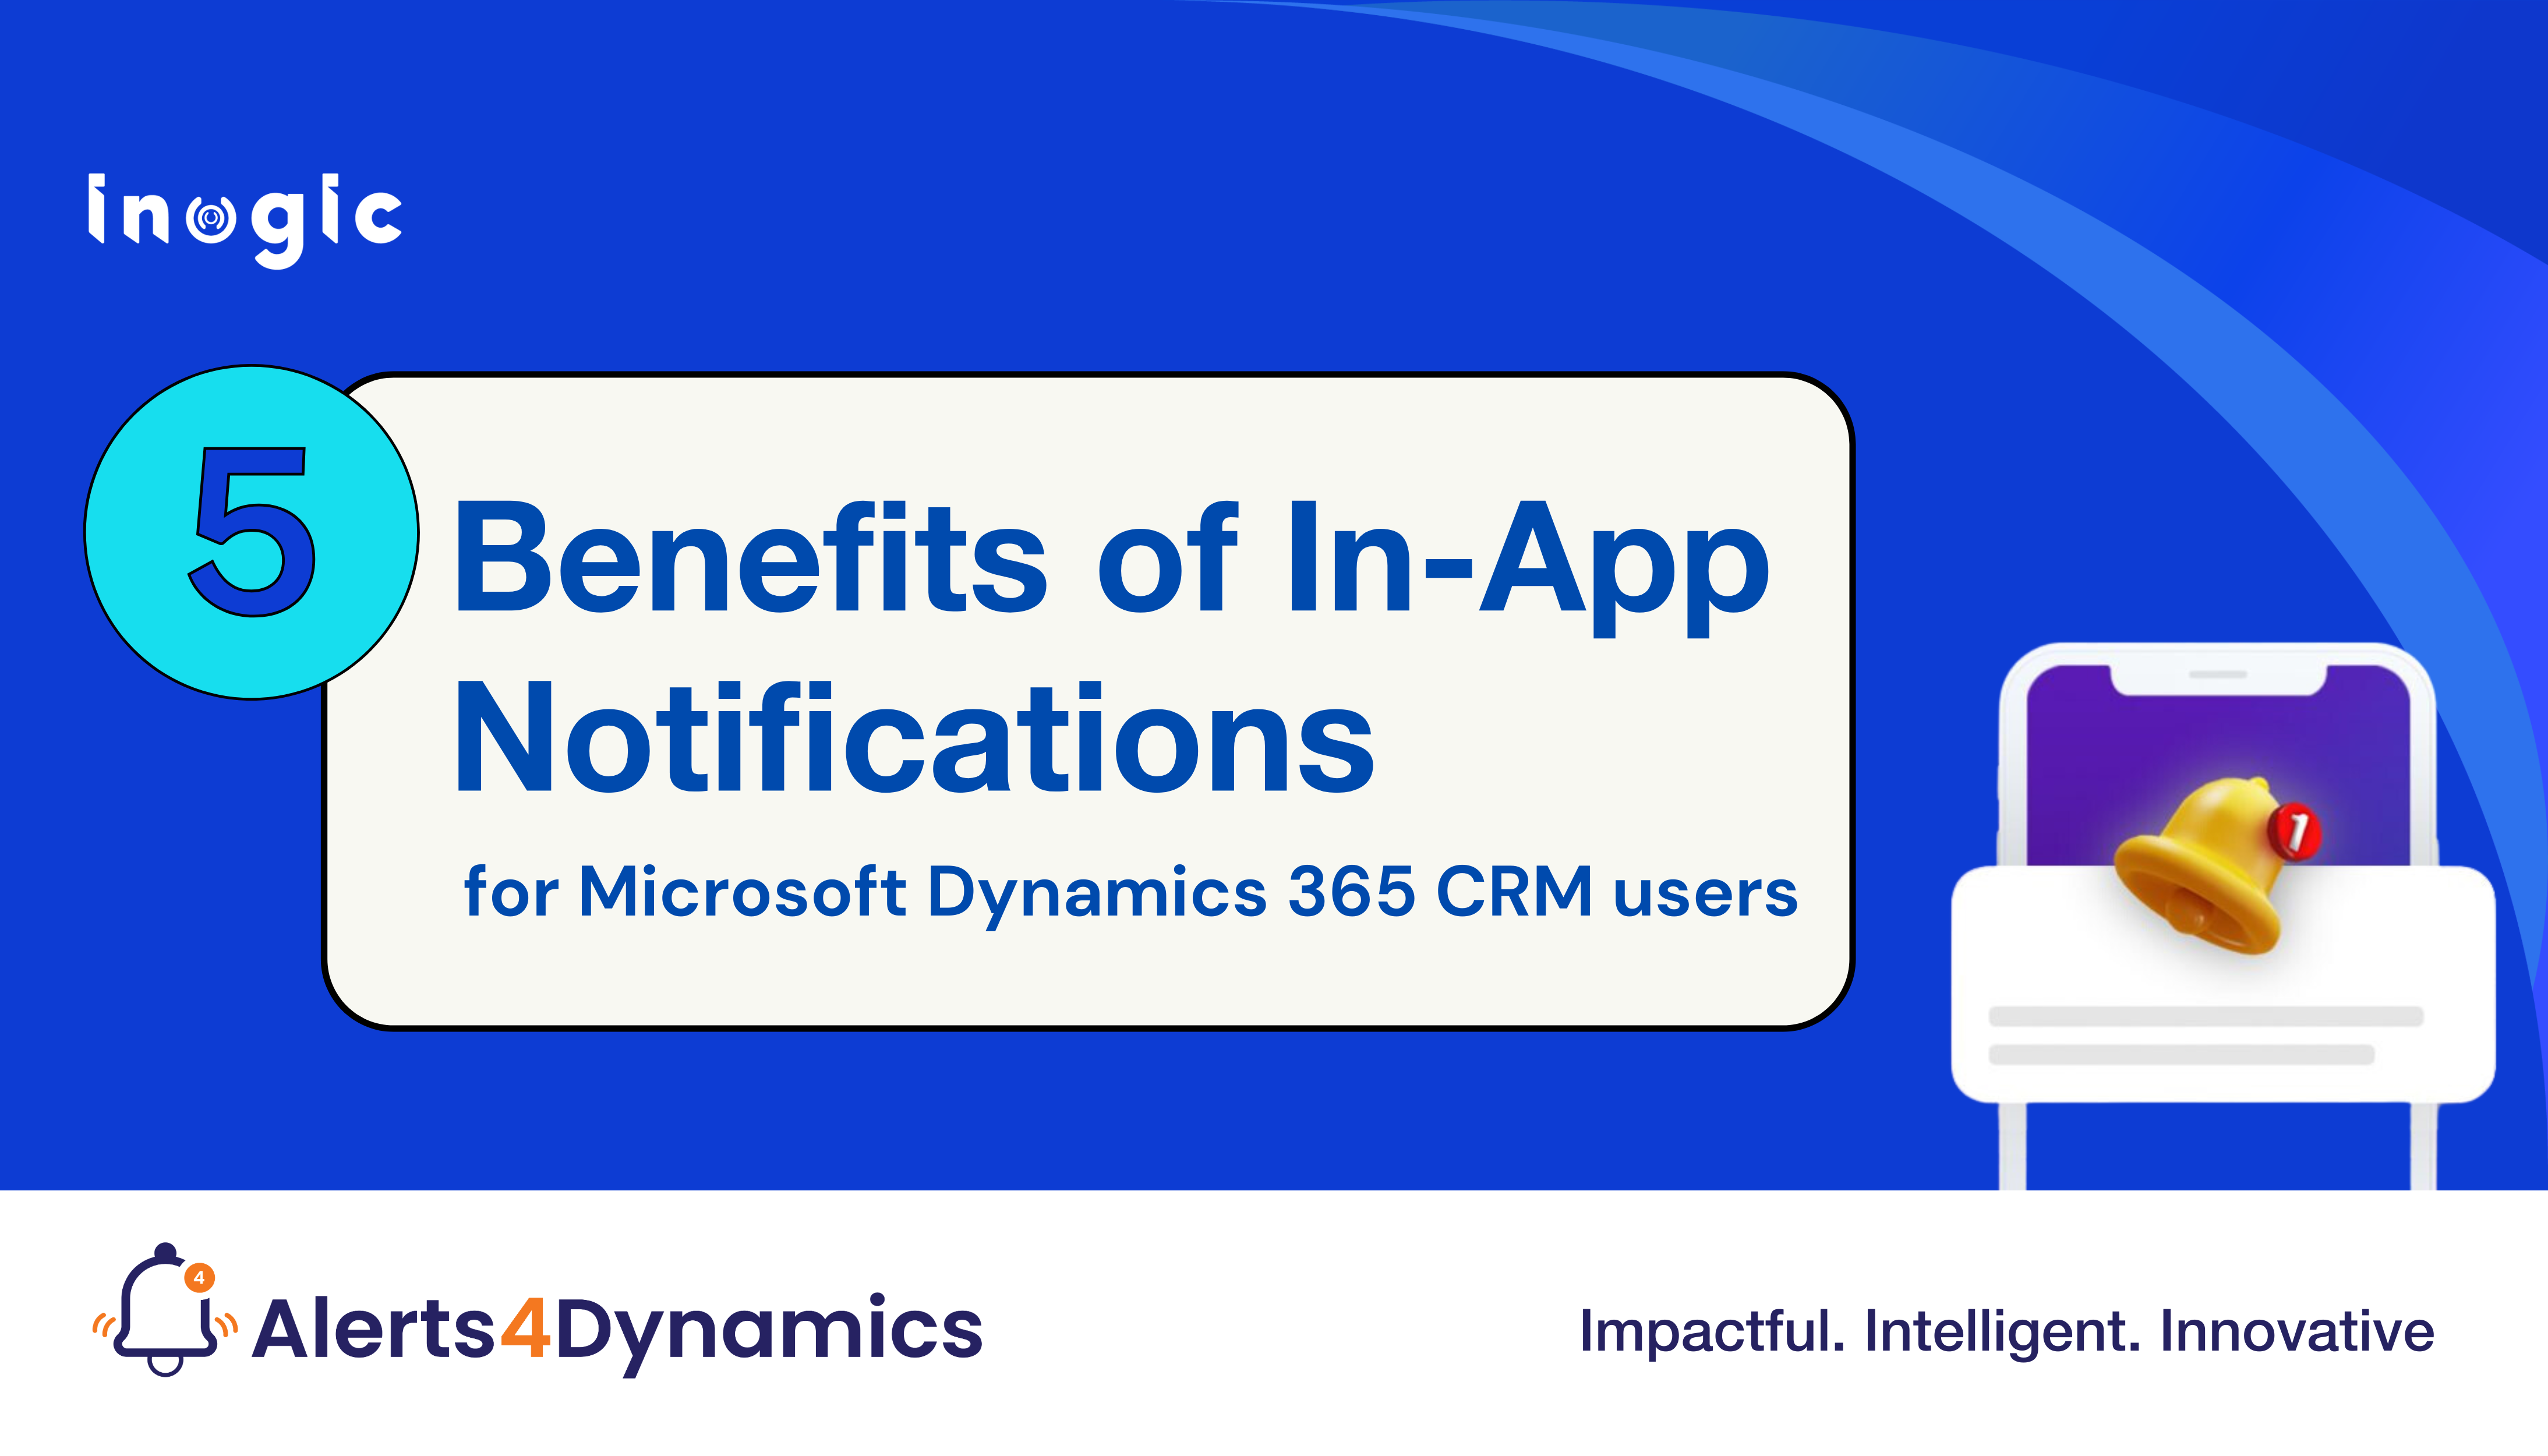 Benefits of In-App Notifications for Microsoft Dynamics 365 CRM users